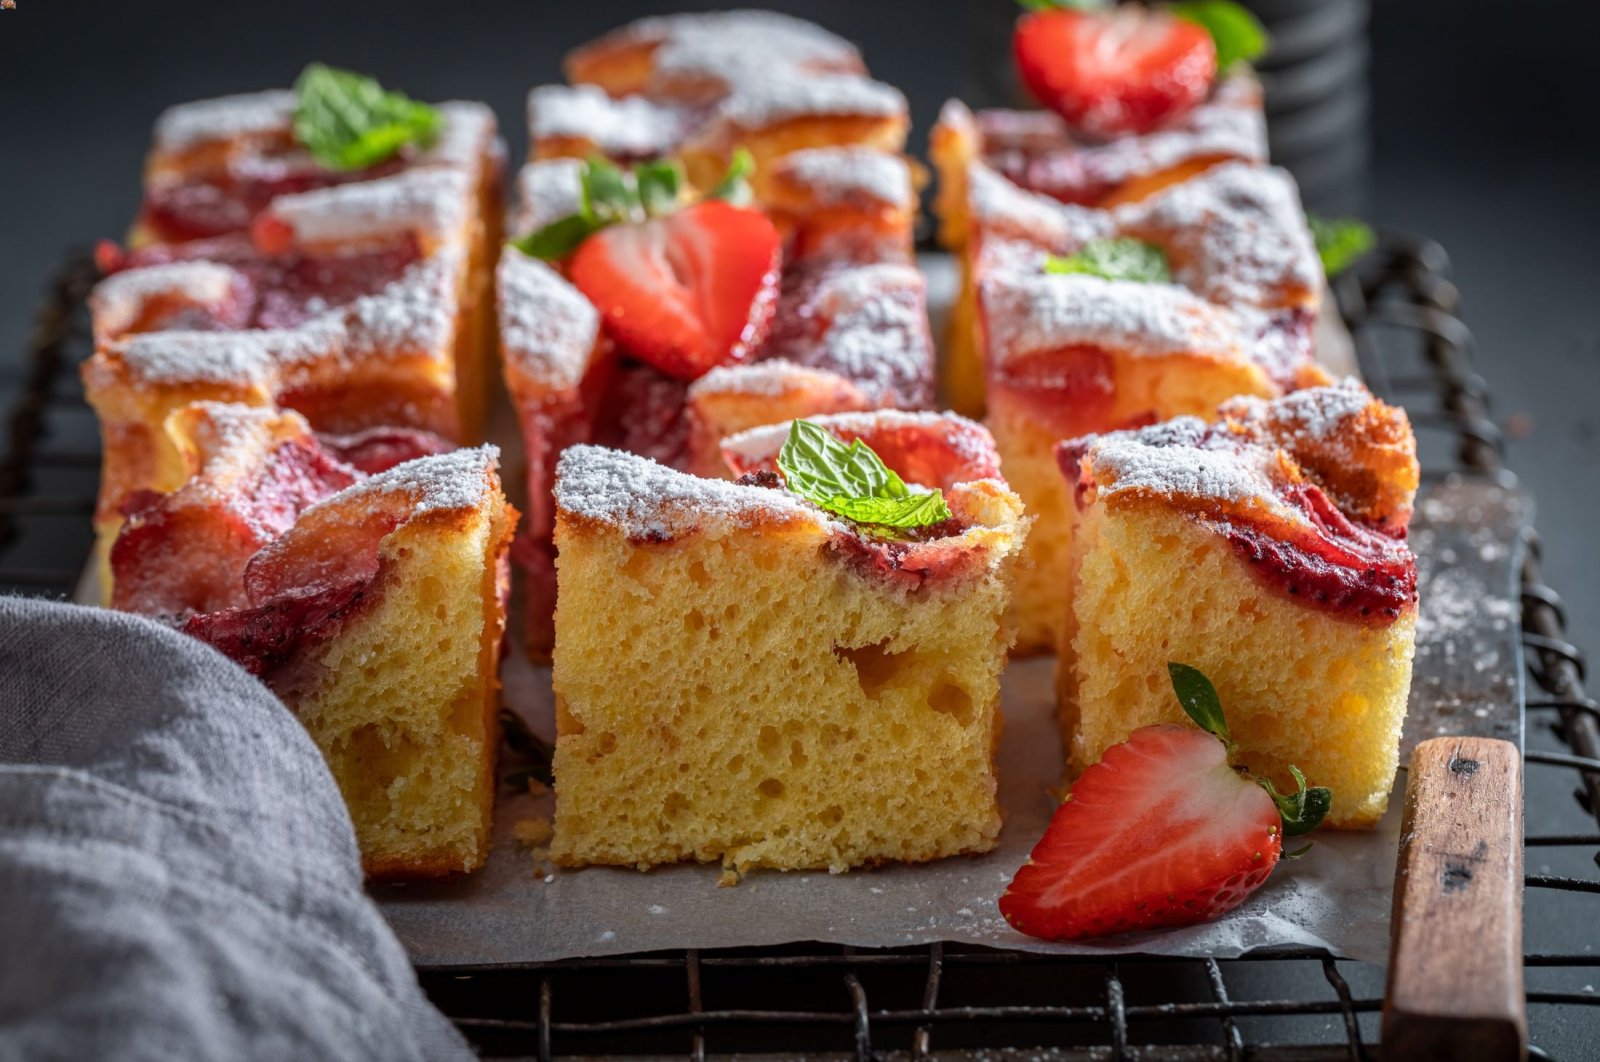 The smell of a delicious cake is great when trying to have a peaceful time. (Shutterstock Photo)